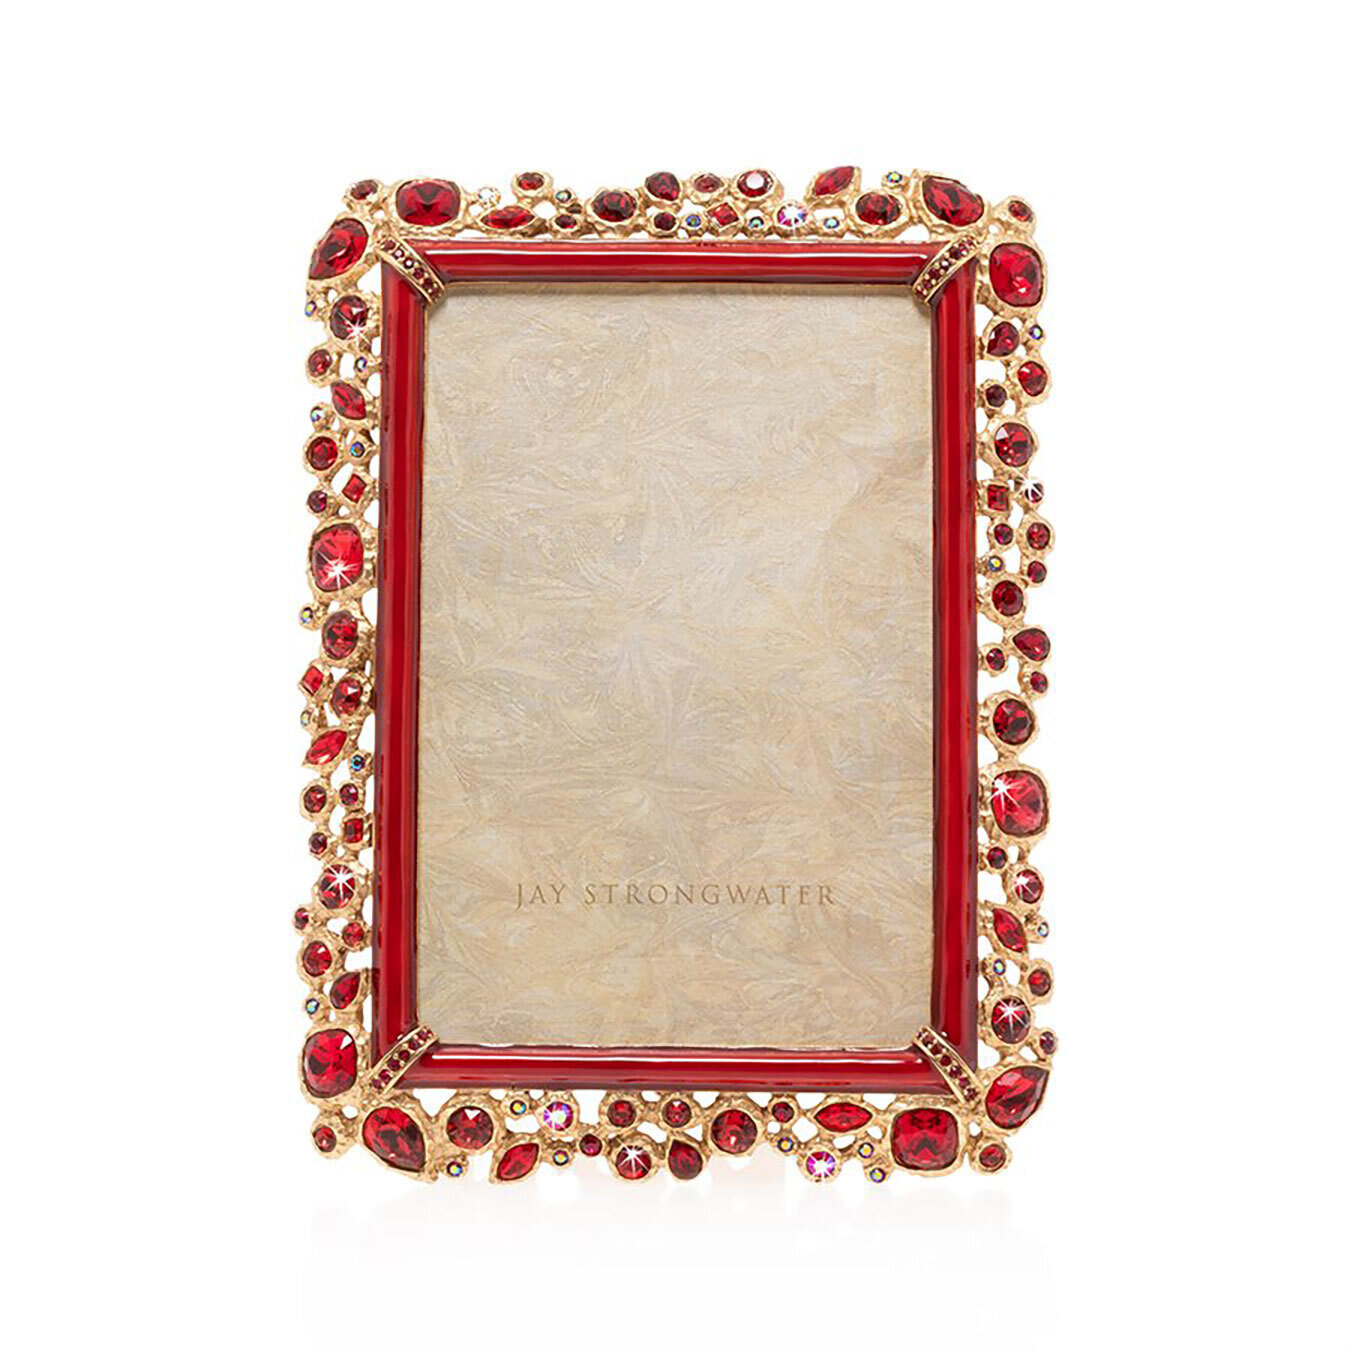 Jay Strongwater Emery Bejeweled 4 X 6 Inch Picture Frame SPF5813-224